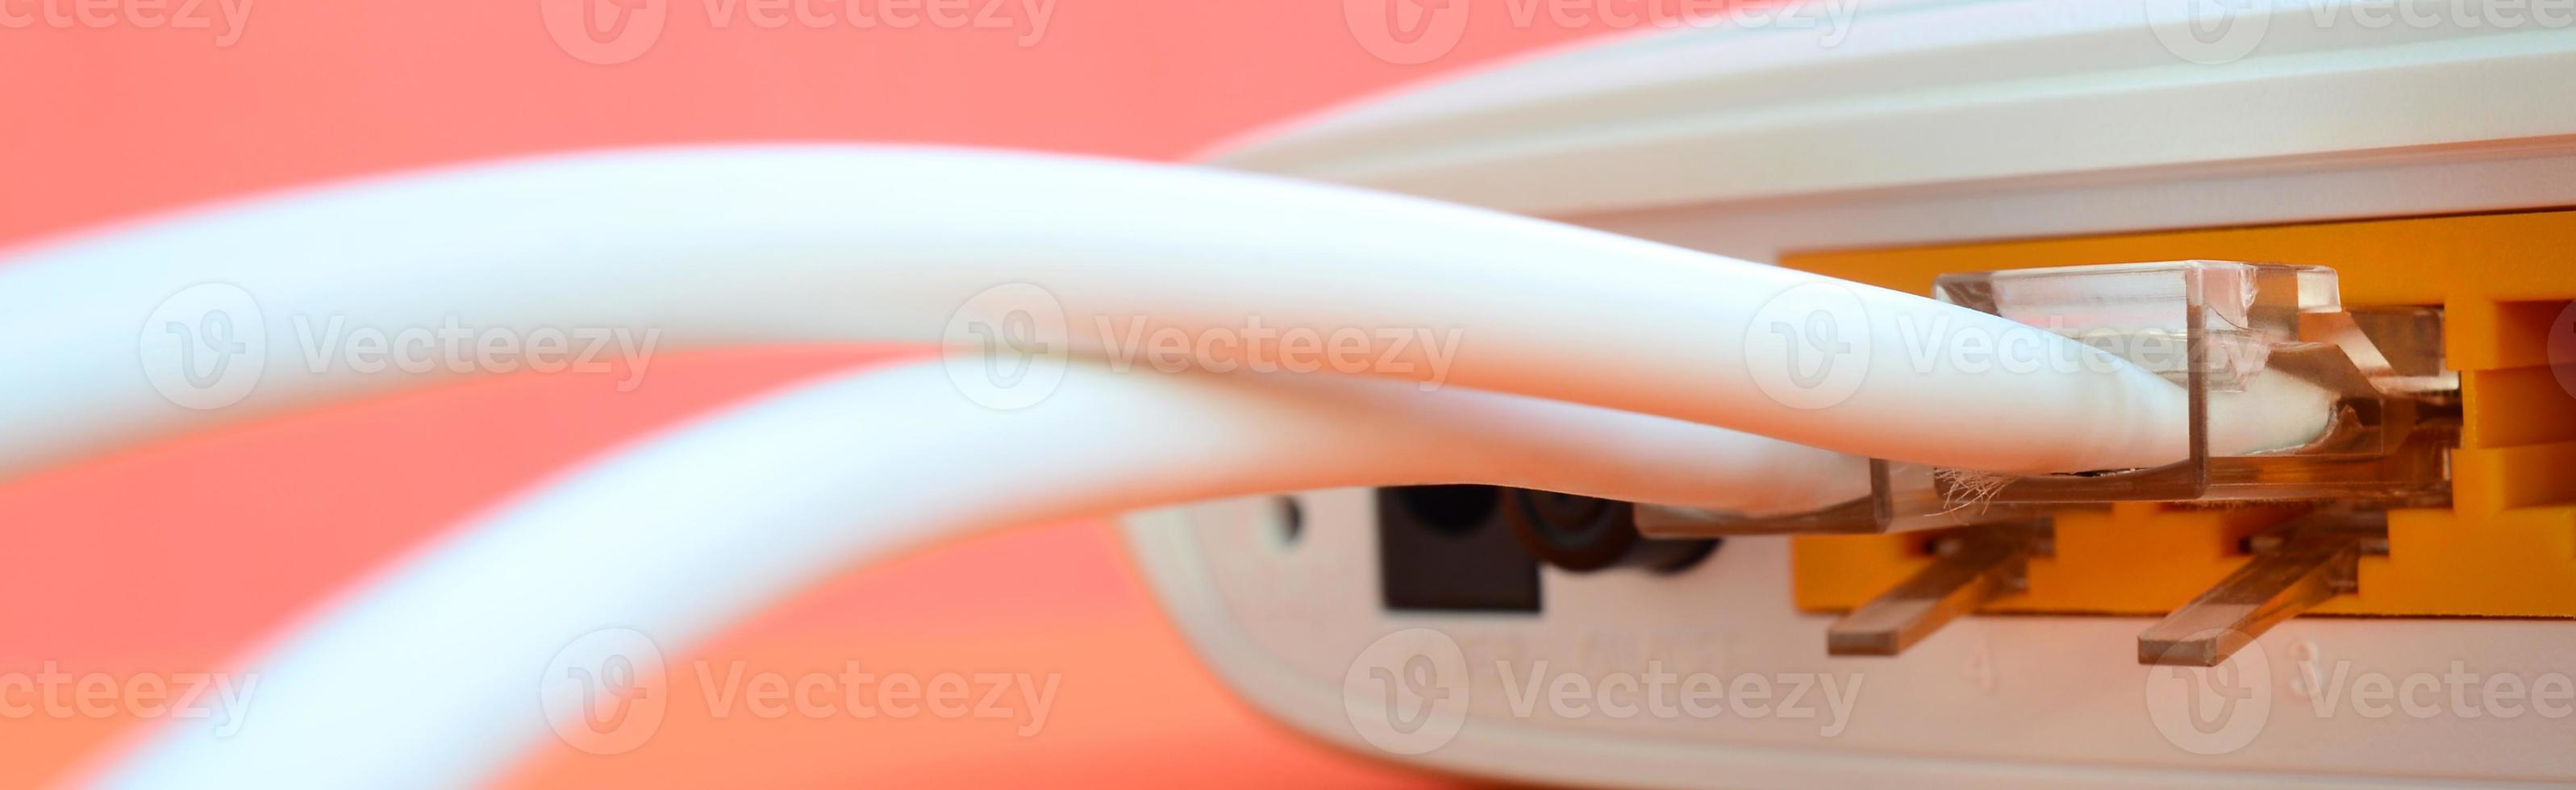 The Internet cable plugs are connected to the Internet router, which lies on a bright orange background. Items required for Internet connection photo